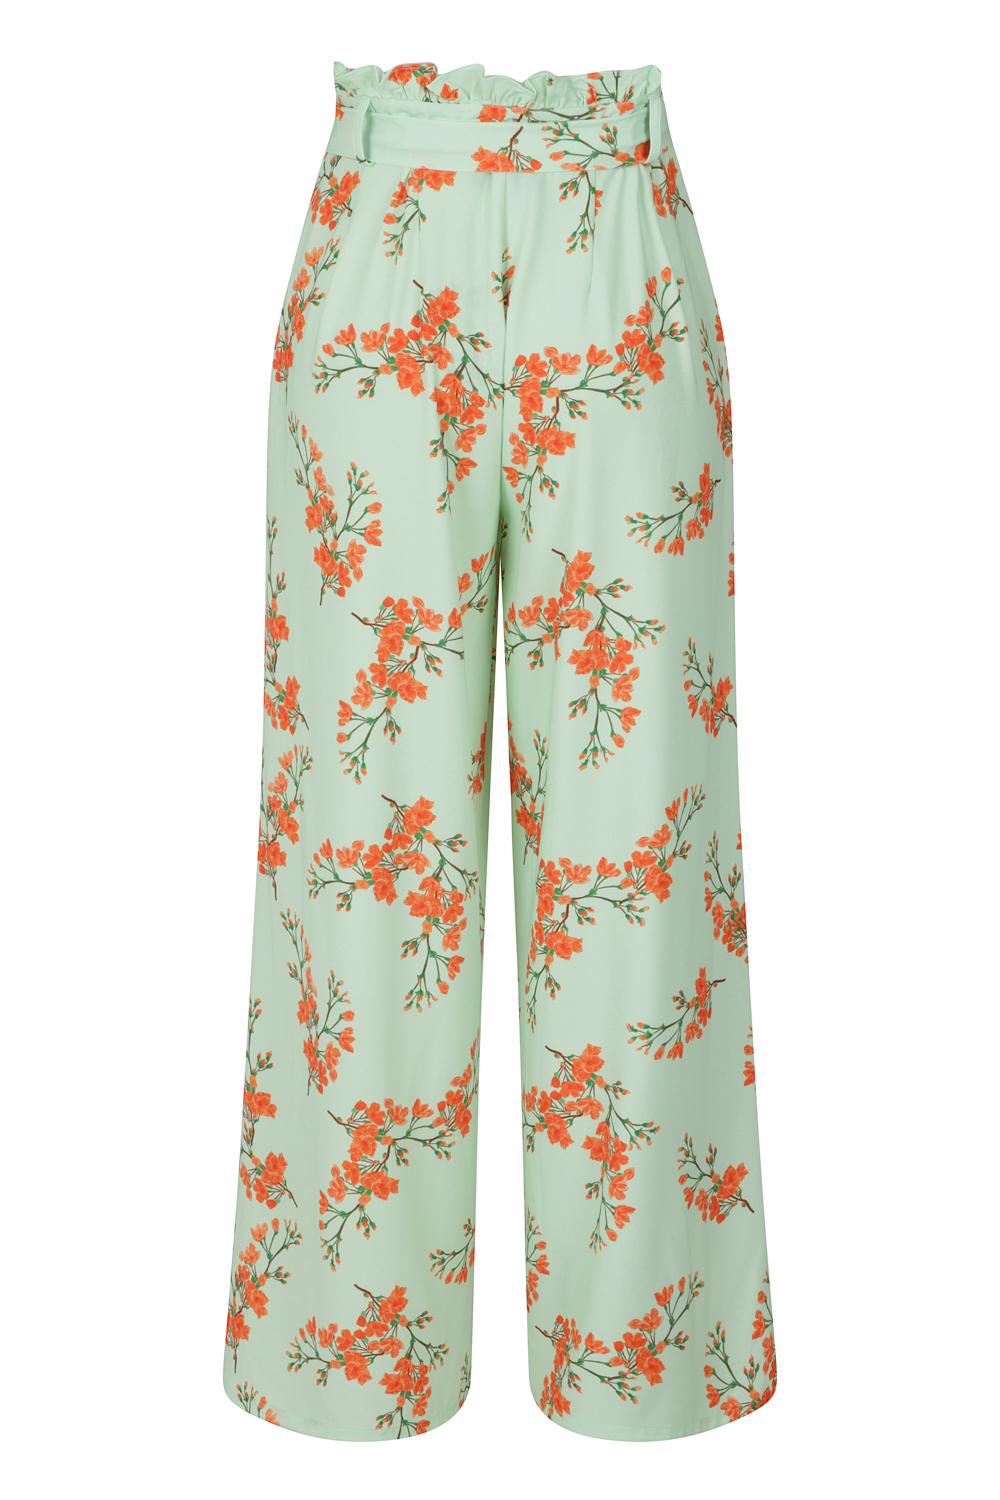 Delores Floral Trousers in Green - Hearts & Roses London